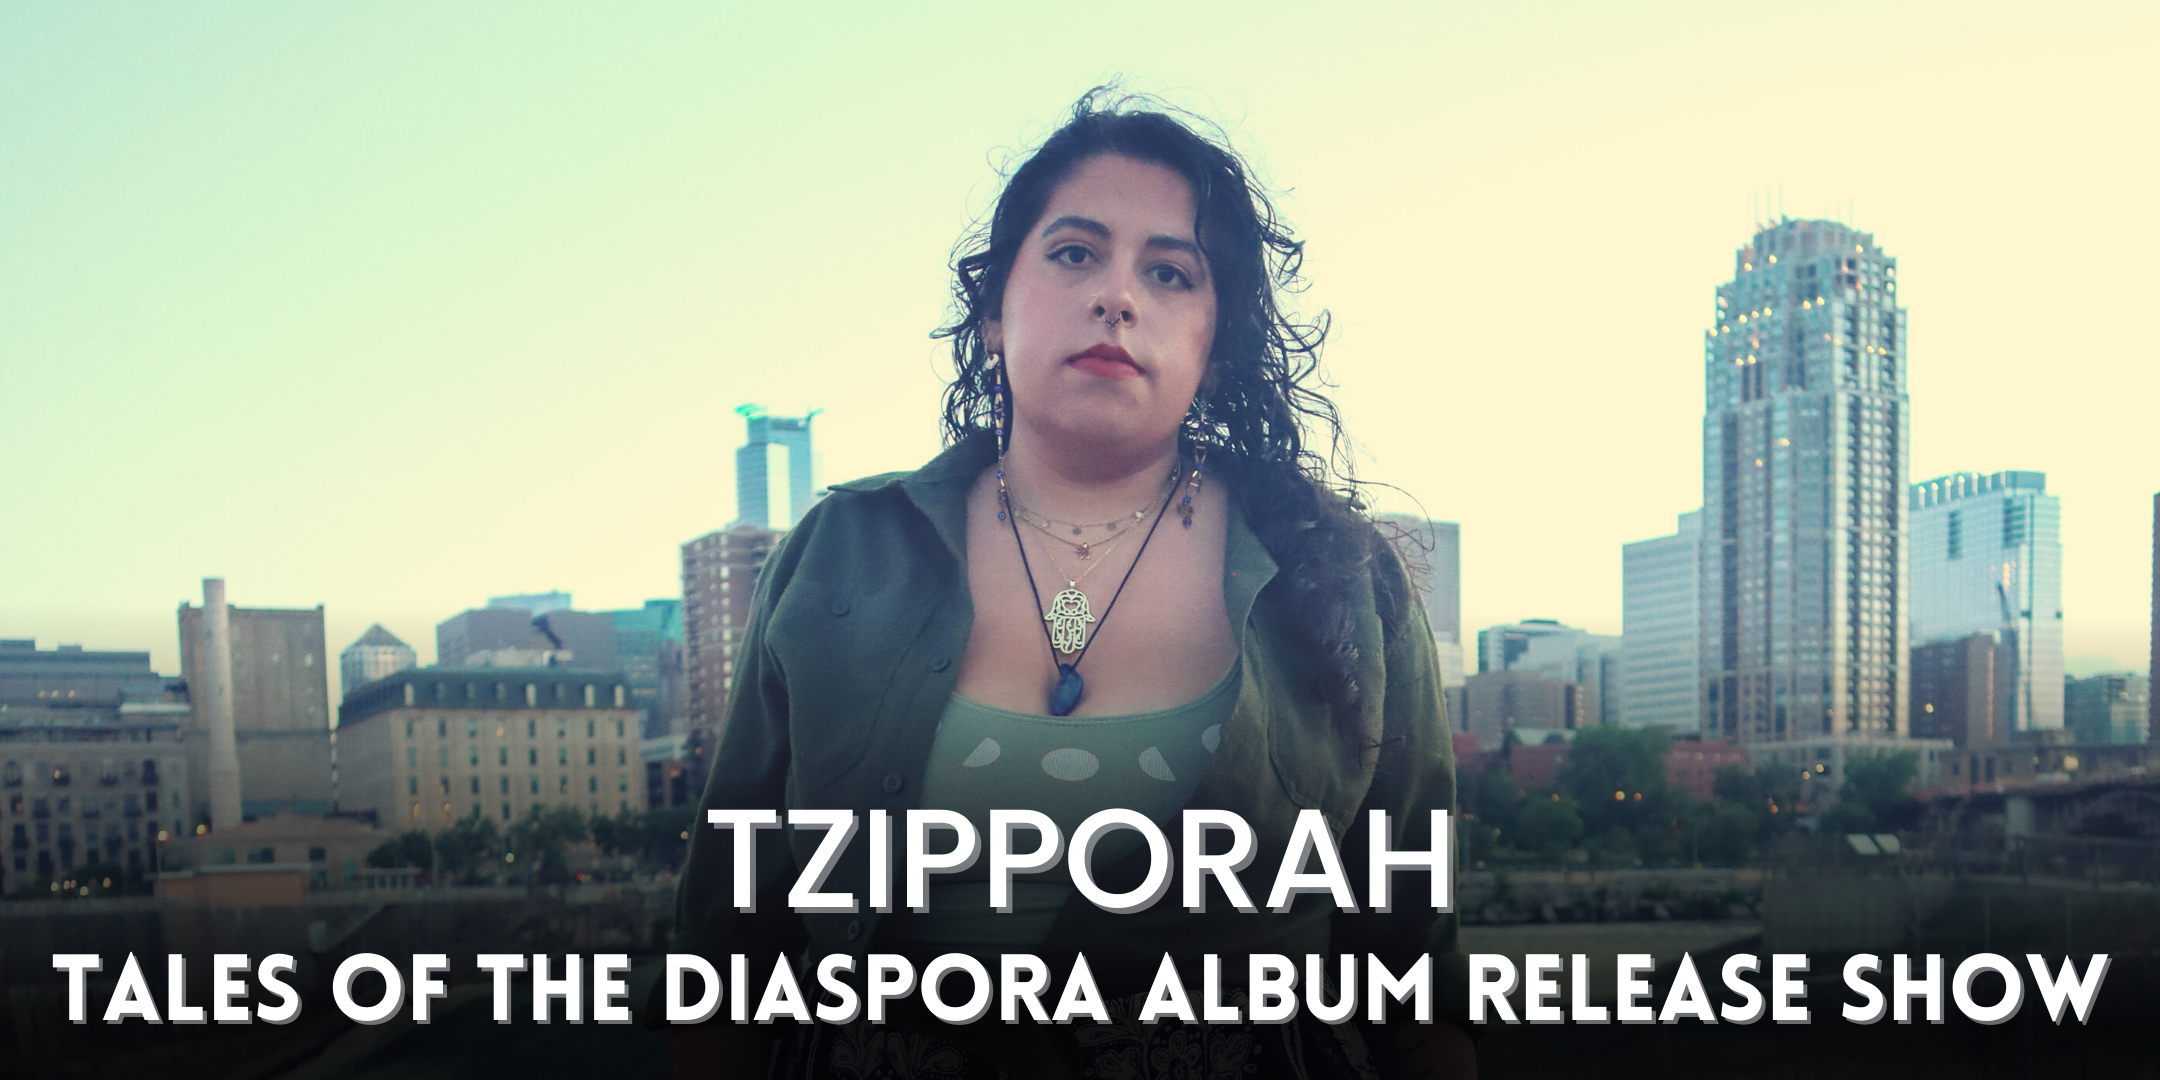 Tzipporah & Friends (Album Release), Sarah Larsson, & Voices of Sepharad Saturday, January 21, 2023 Mission Room at The Hook and Ladder Theater Doors 7:30pm :: Music 8:00pm :: 21+ $15 Advance / $20 Day of Show